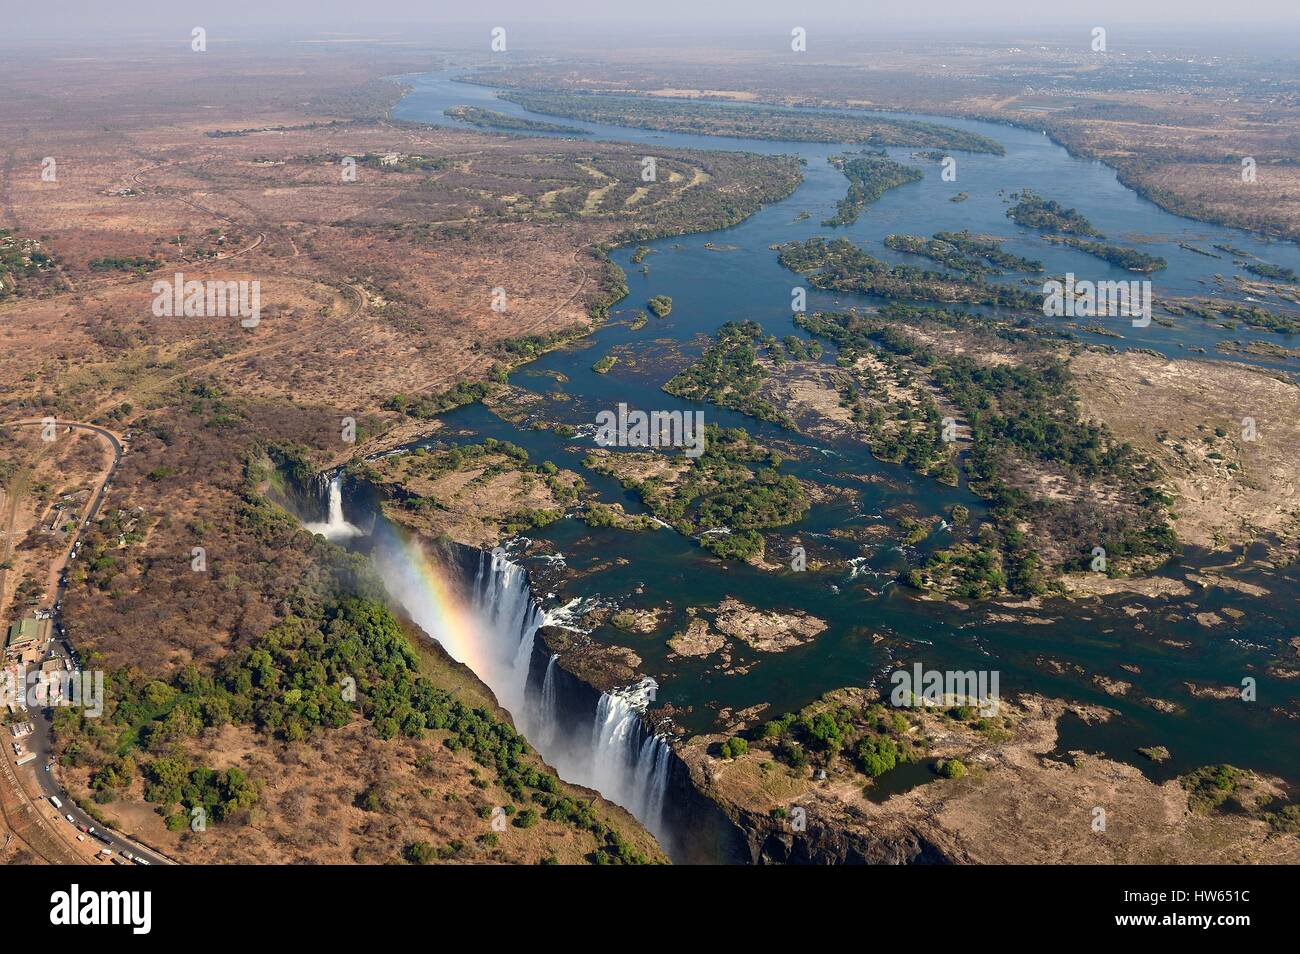 Zimbabwe, Matabeleland North Province, Zambesi River, the Victoria Falls, listed as World Heritage by UNESCO (aerial view) Stock Photo